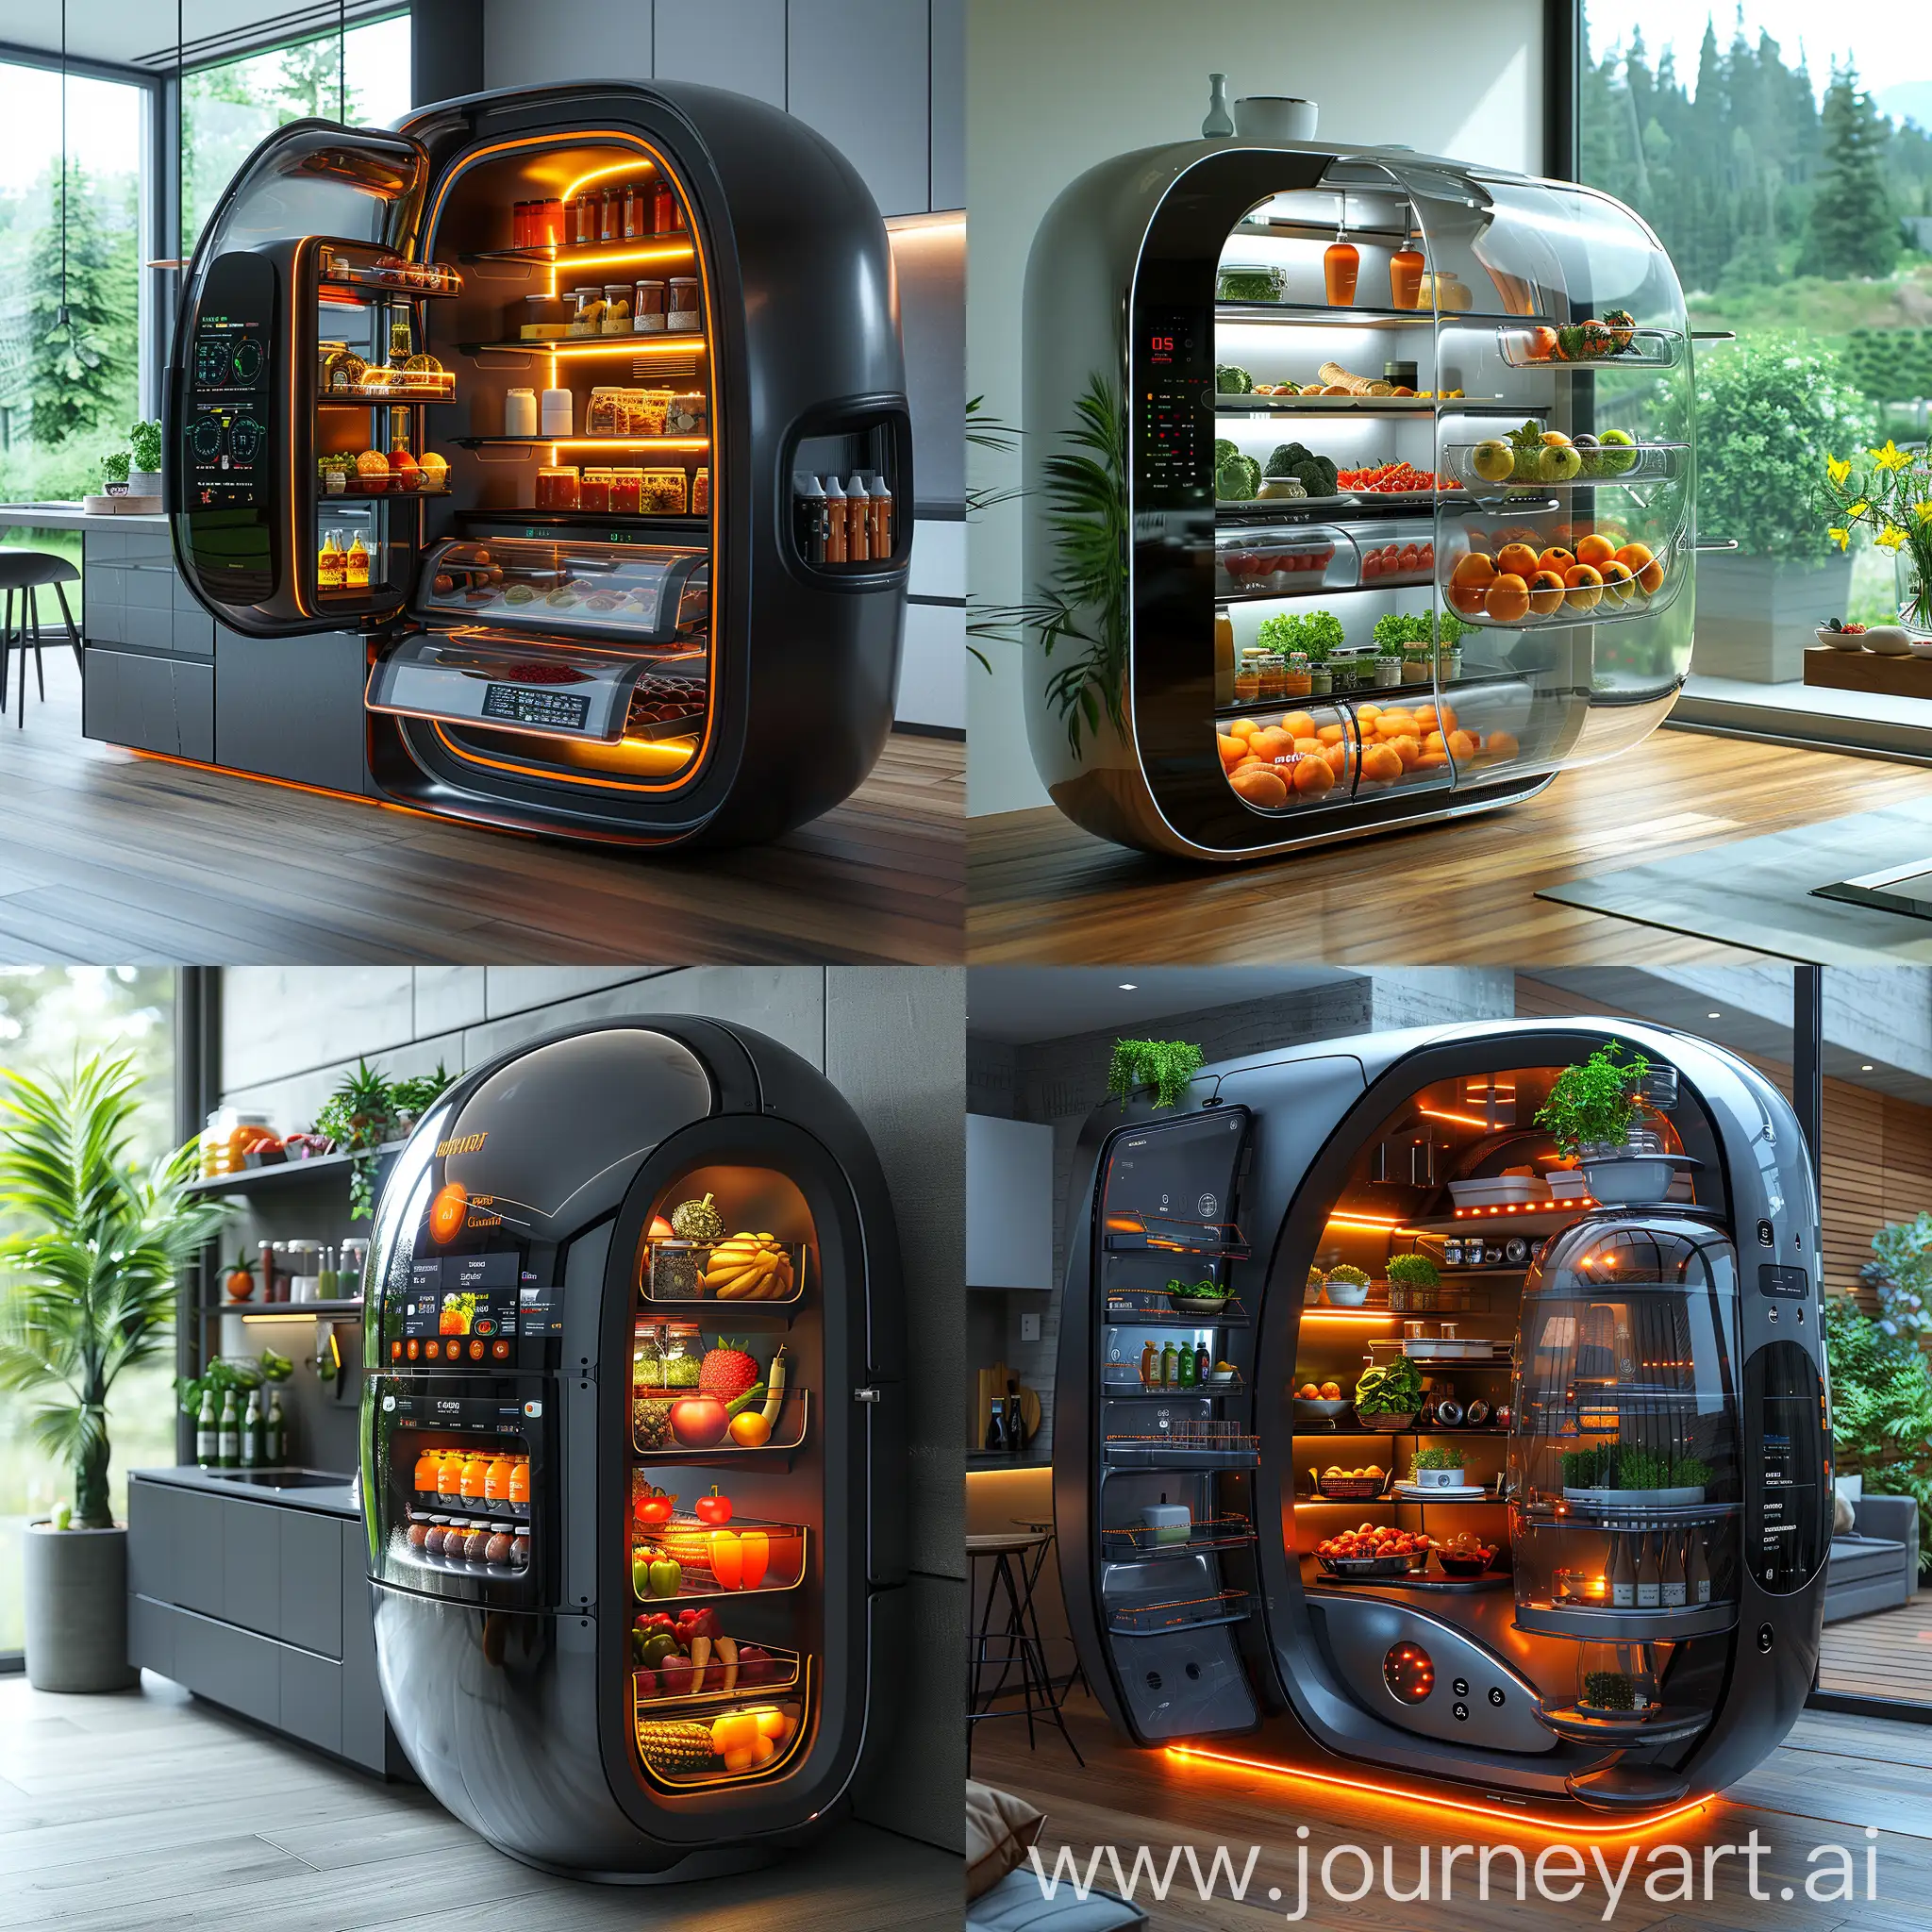 Futuristic-Smart-Fridge-with-AI-Integration-and-SelfCleaning-Function